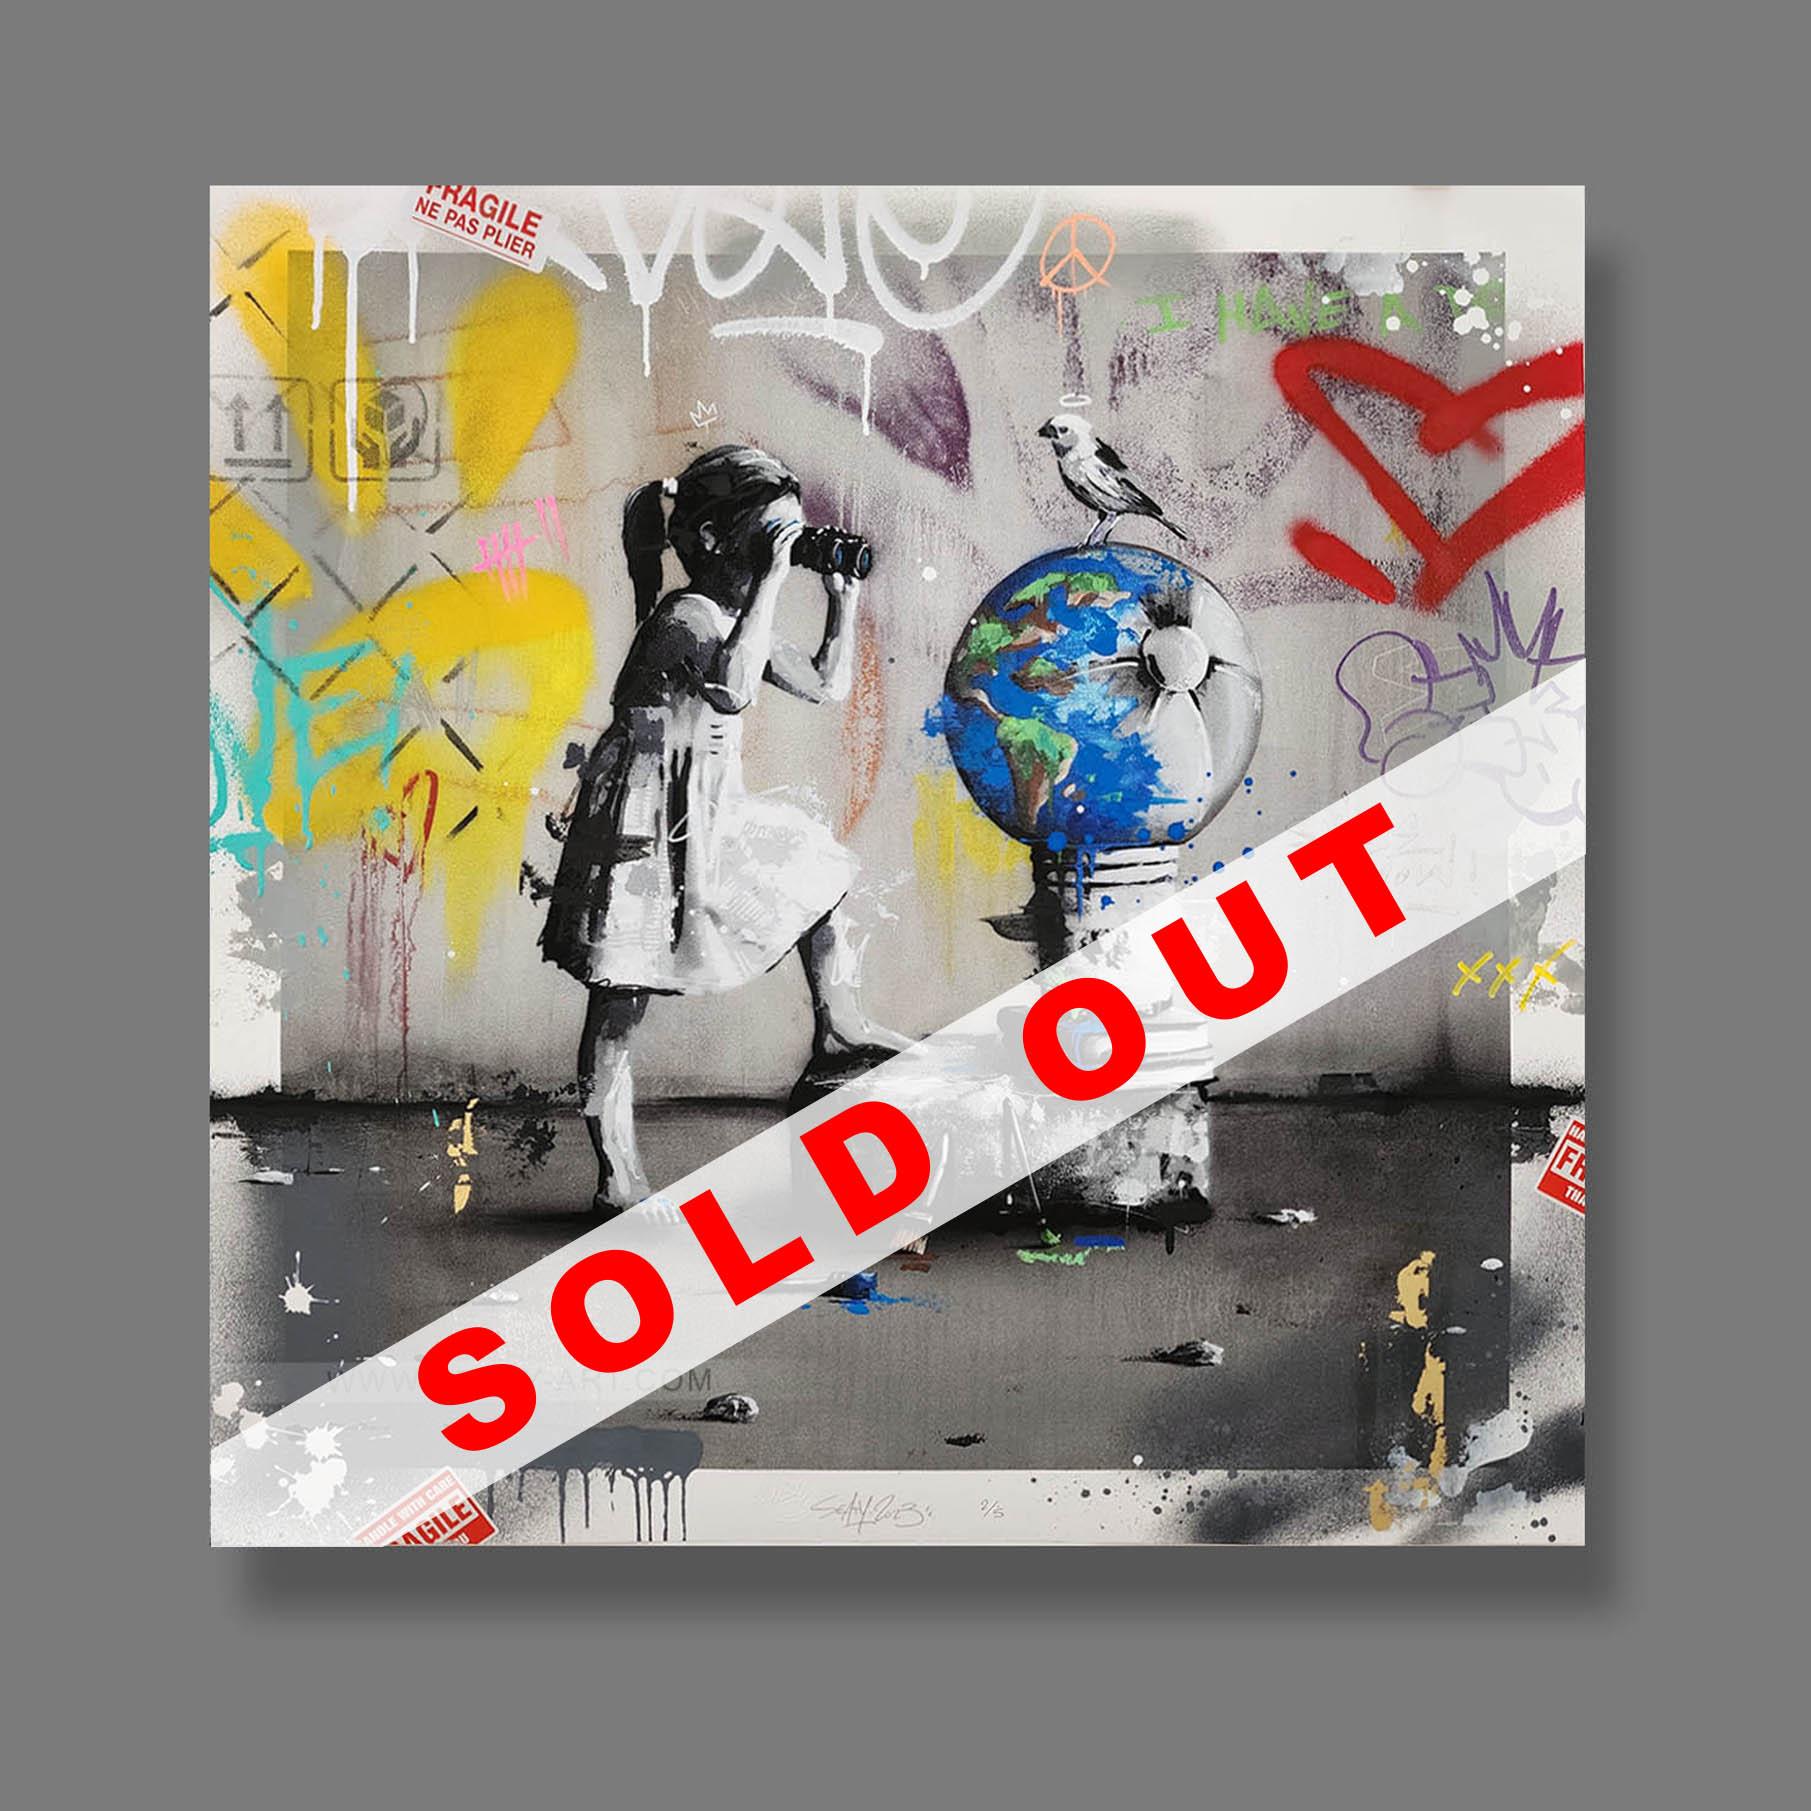 Sold out site 2